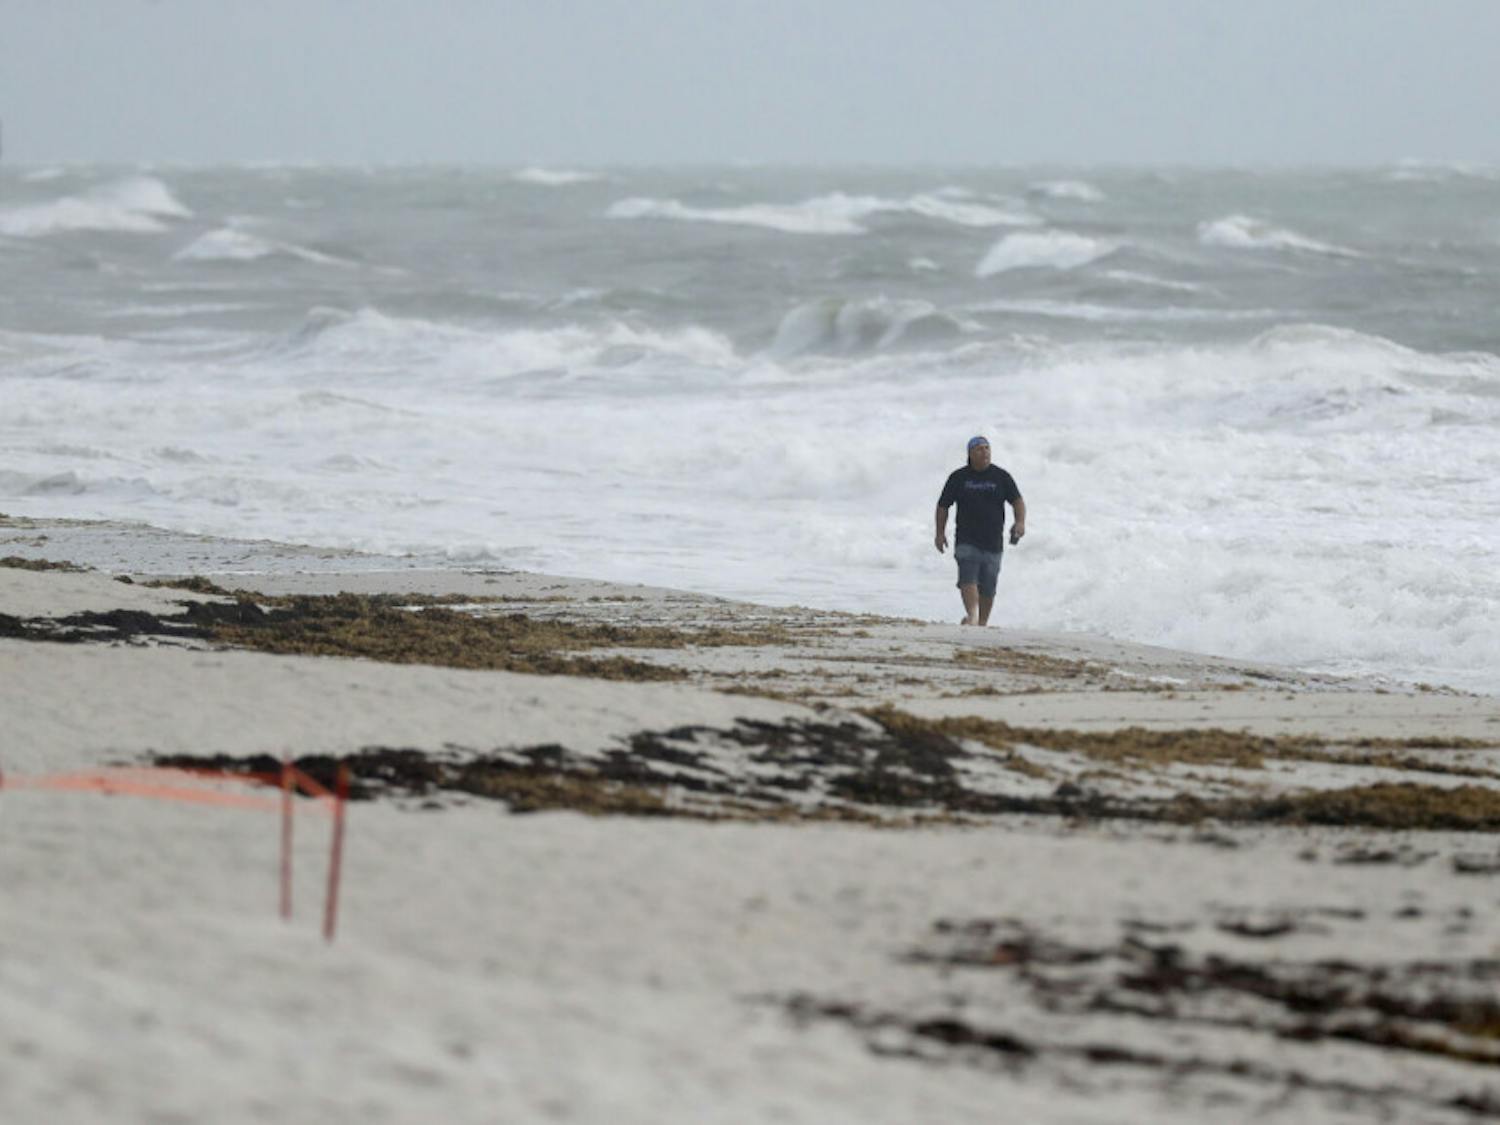 A beach goer walks along the shore as waves churned up by Tropical Storm Isaias crash near Jaycee Beach Park, Sunday, Aug. 2, 2020, in Vero Beach, Fla. Isaias weakened from a hurricane to a tropical storm late Saturday afternoon, but was still expected to bring heavy rain and flooding as it barrels toward Florida. (AP Photo/Wilfredo Lee)